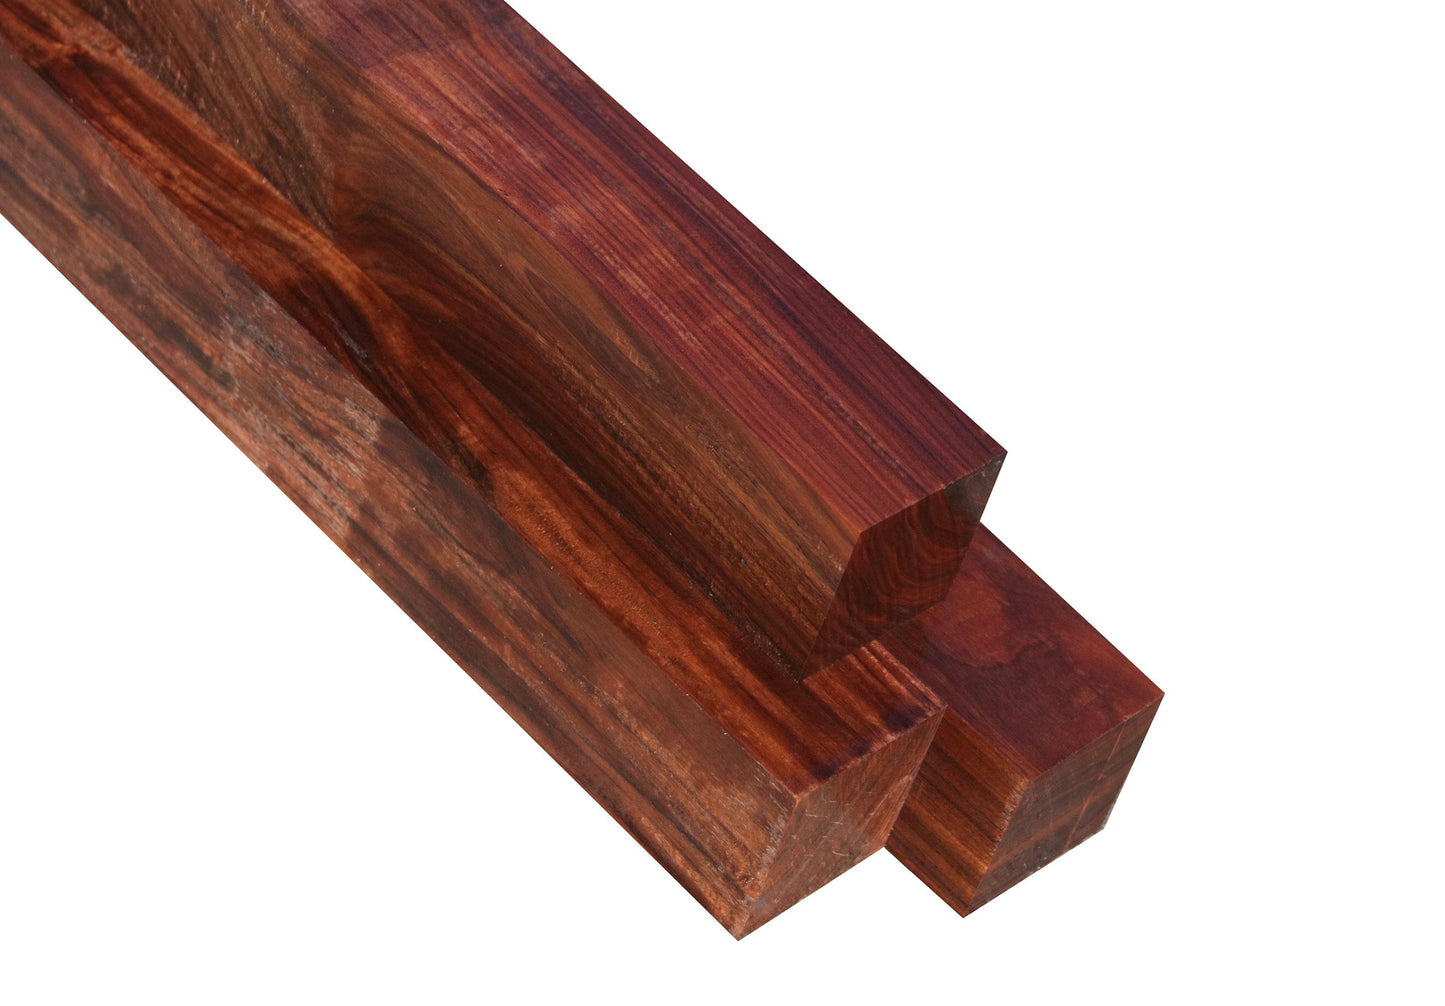 Bolivian Rosewood Turning Square (12" x 2" x 2")